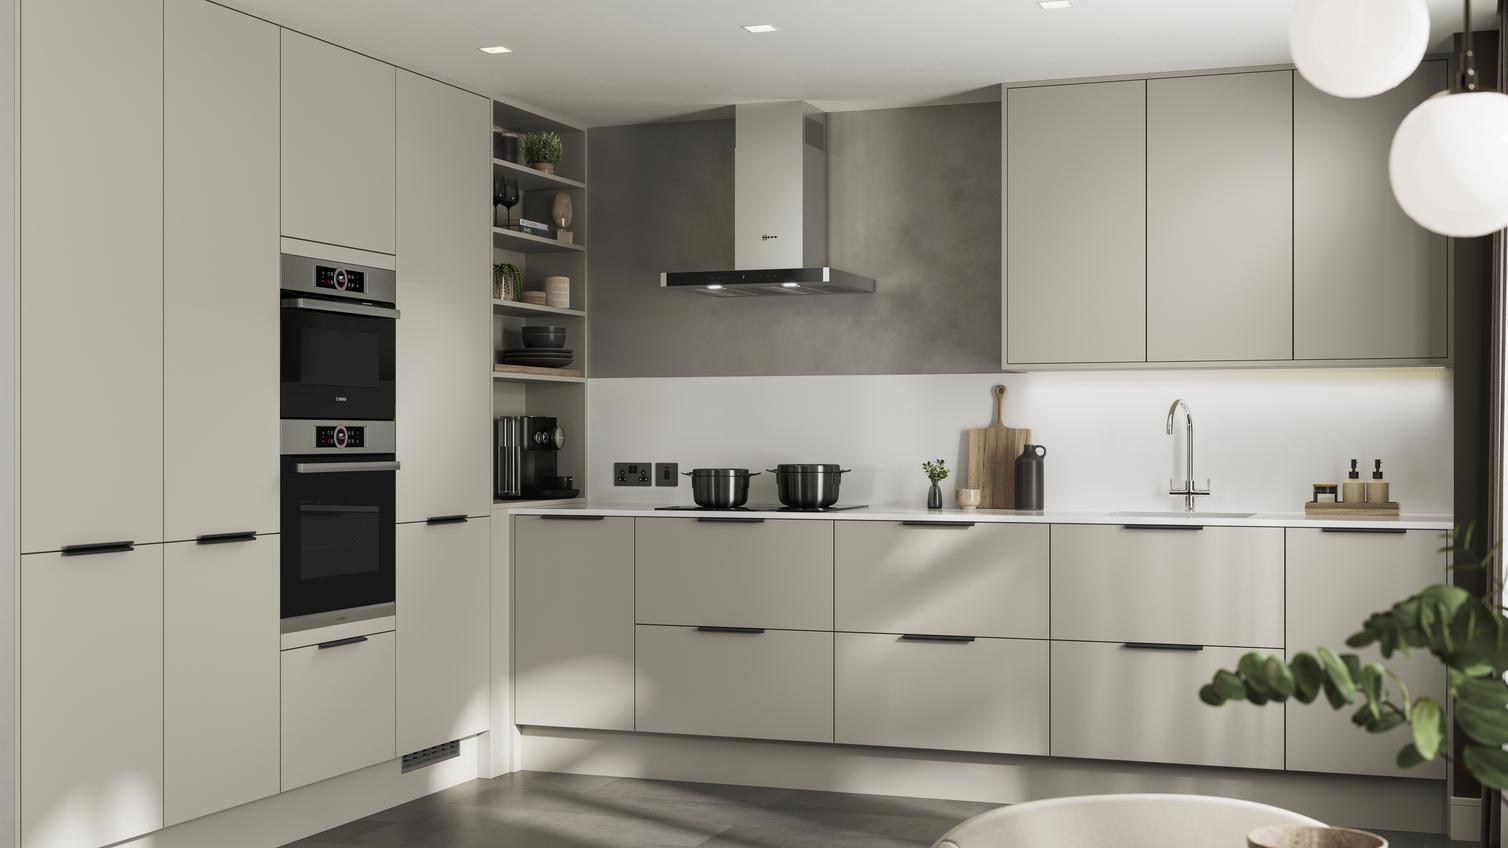 L-shape modern kitchen design with neutral slab cupboards in a matt finish. Includes two-drawer units and black bar handles.